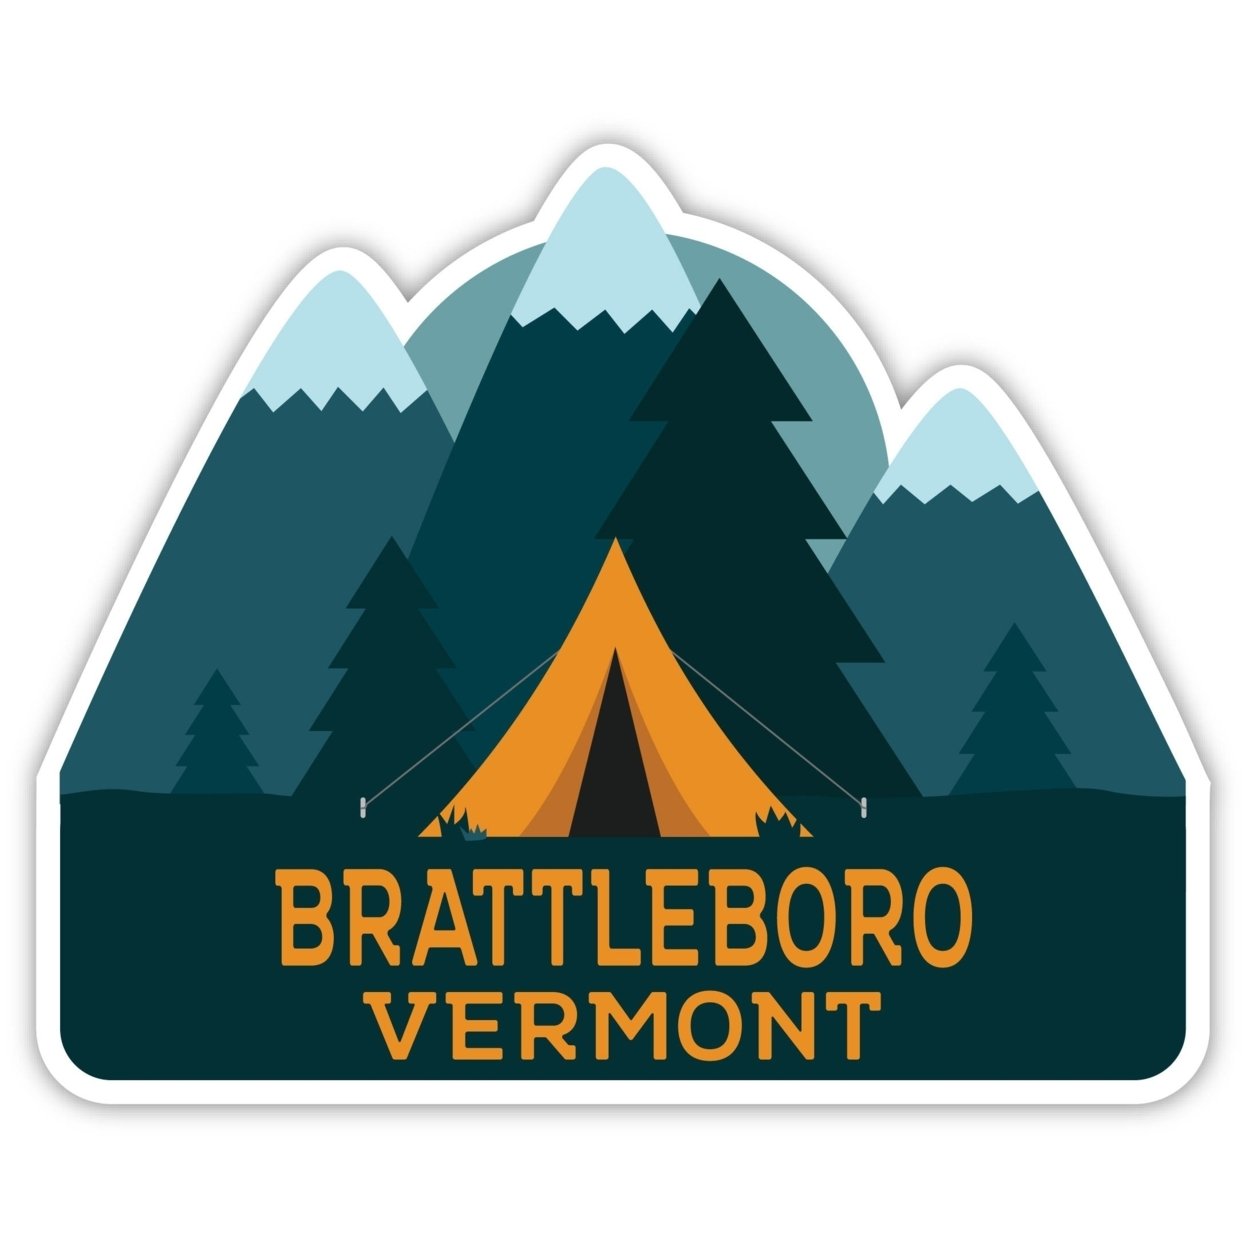 Brattleboro Vermont Souvenir Decorative Stickers (Choose Theme And Size) - 4-Pack, 12-Inch, Great Outdoors